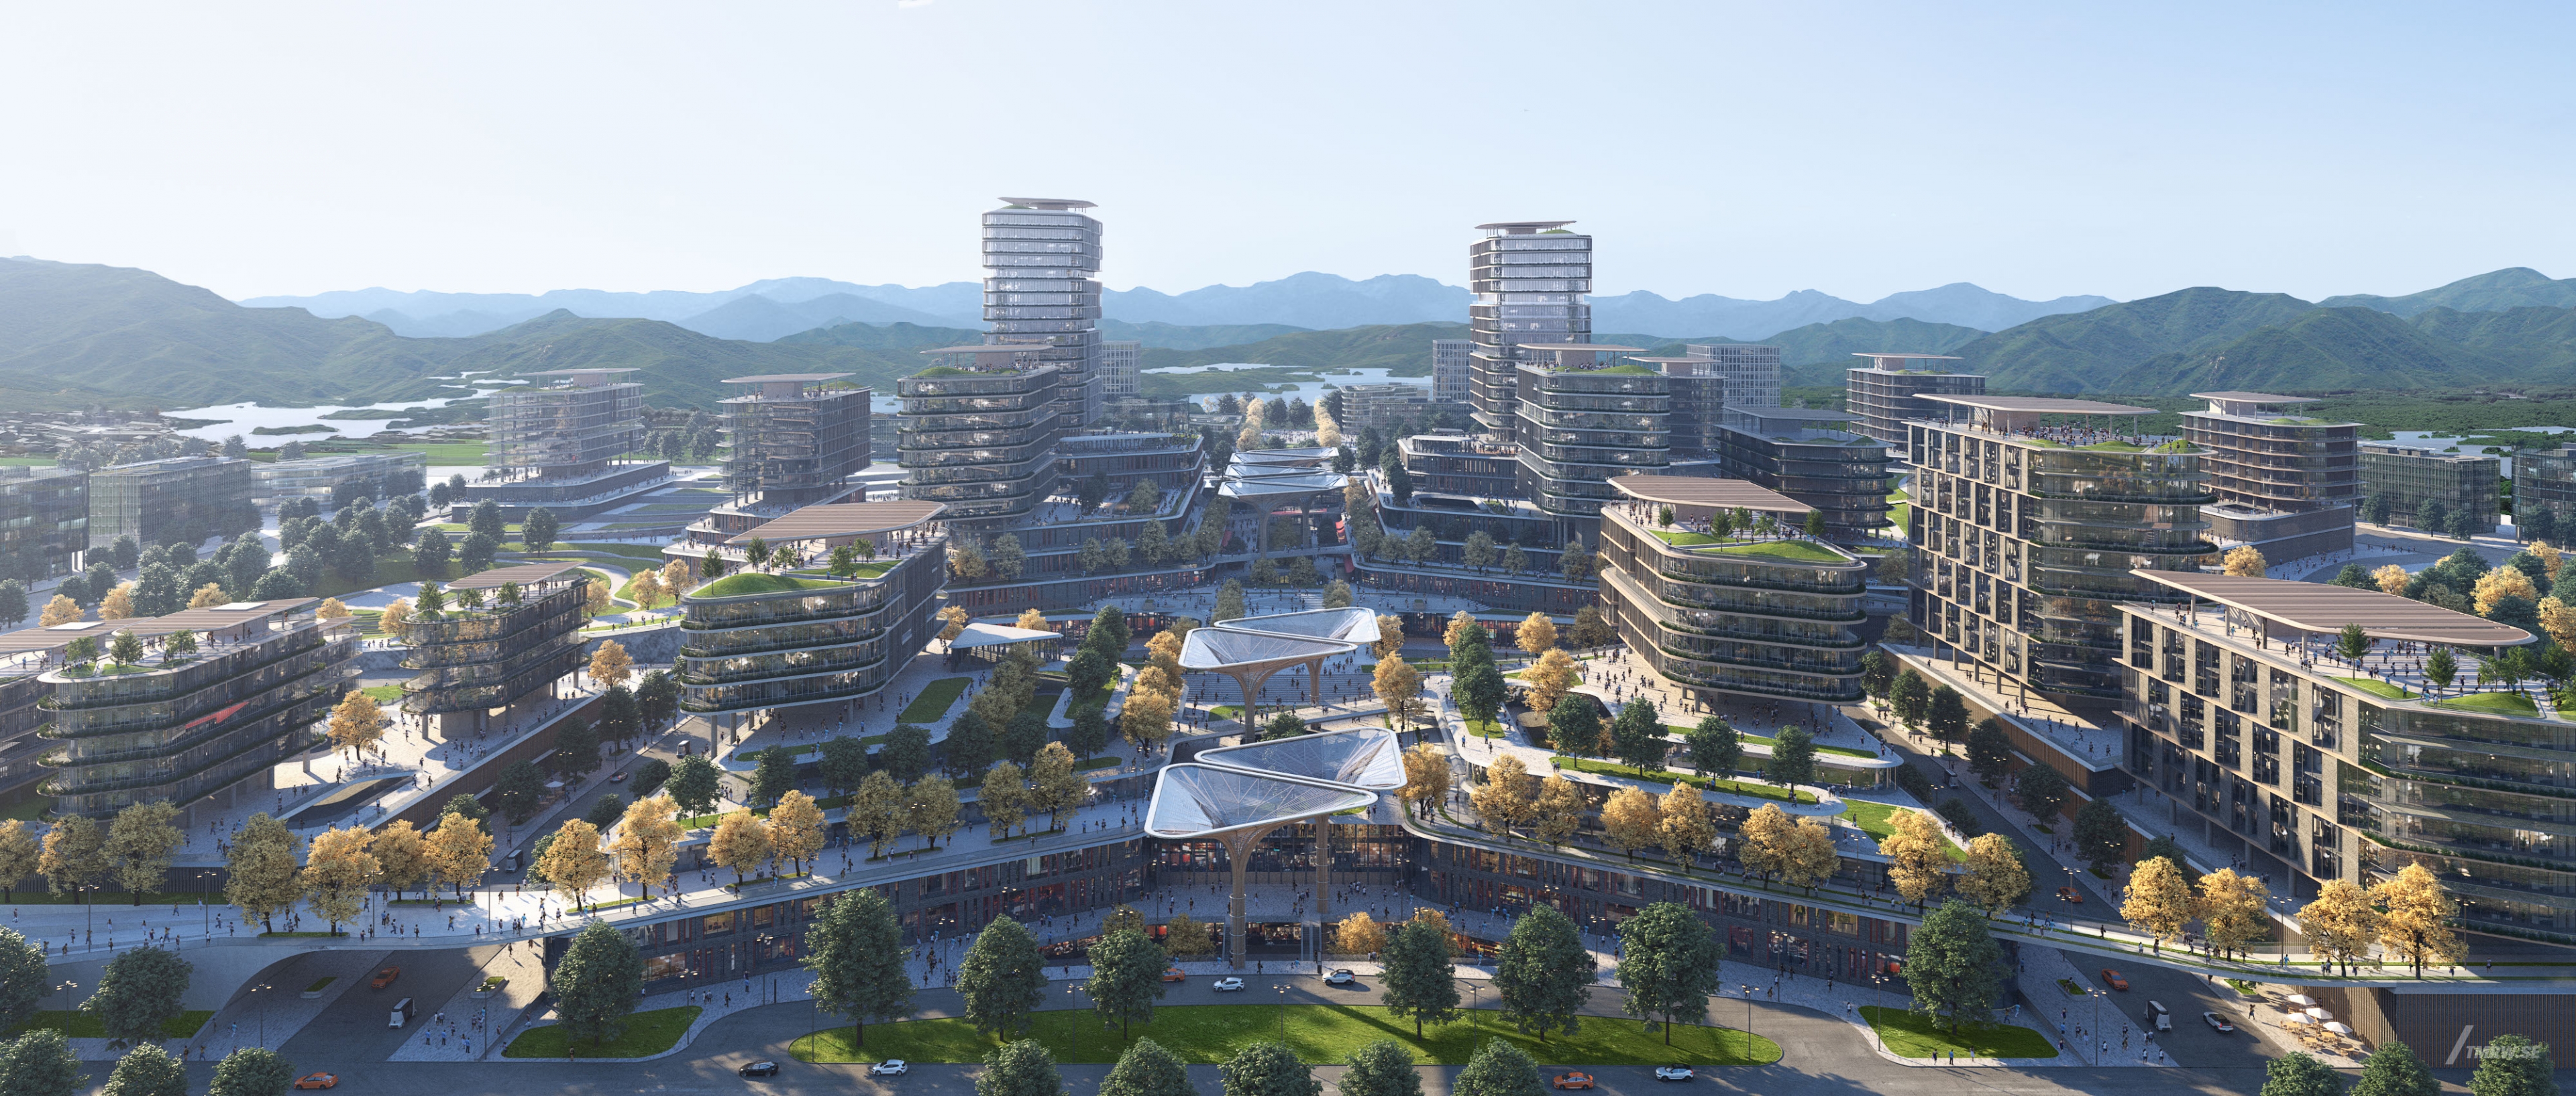 Architectural visualization of Chengdu for SOM. An image of several buildings from semi aerial view in daylight.